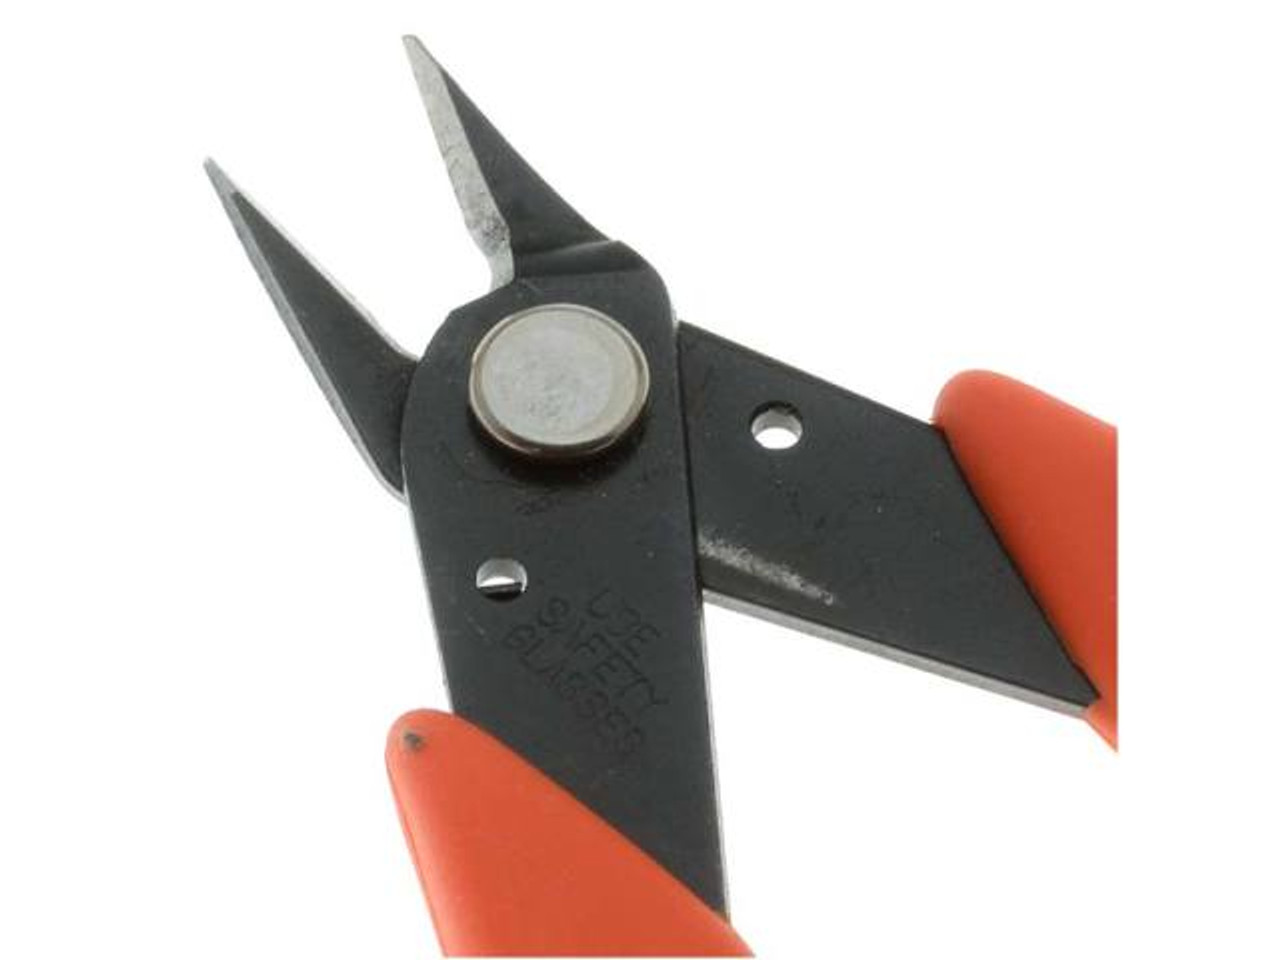 Flush Cutter Tool - Jewelry Wire Cutters - Jewelry Making Tools at Weekend  Kits